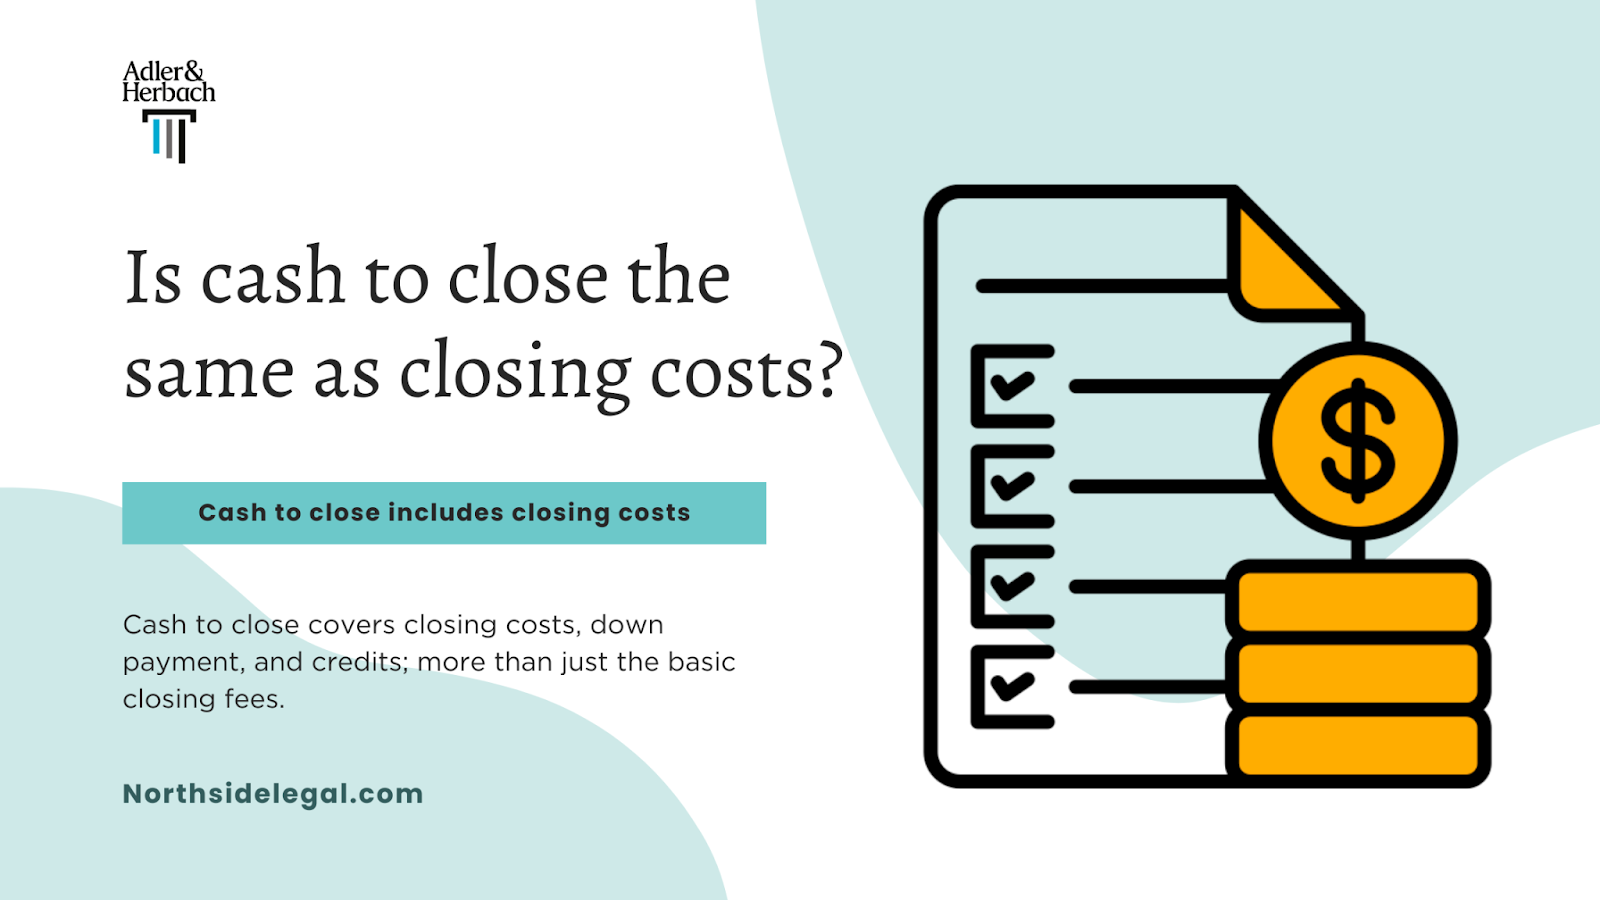 Is cash to close the same as closing costs?